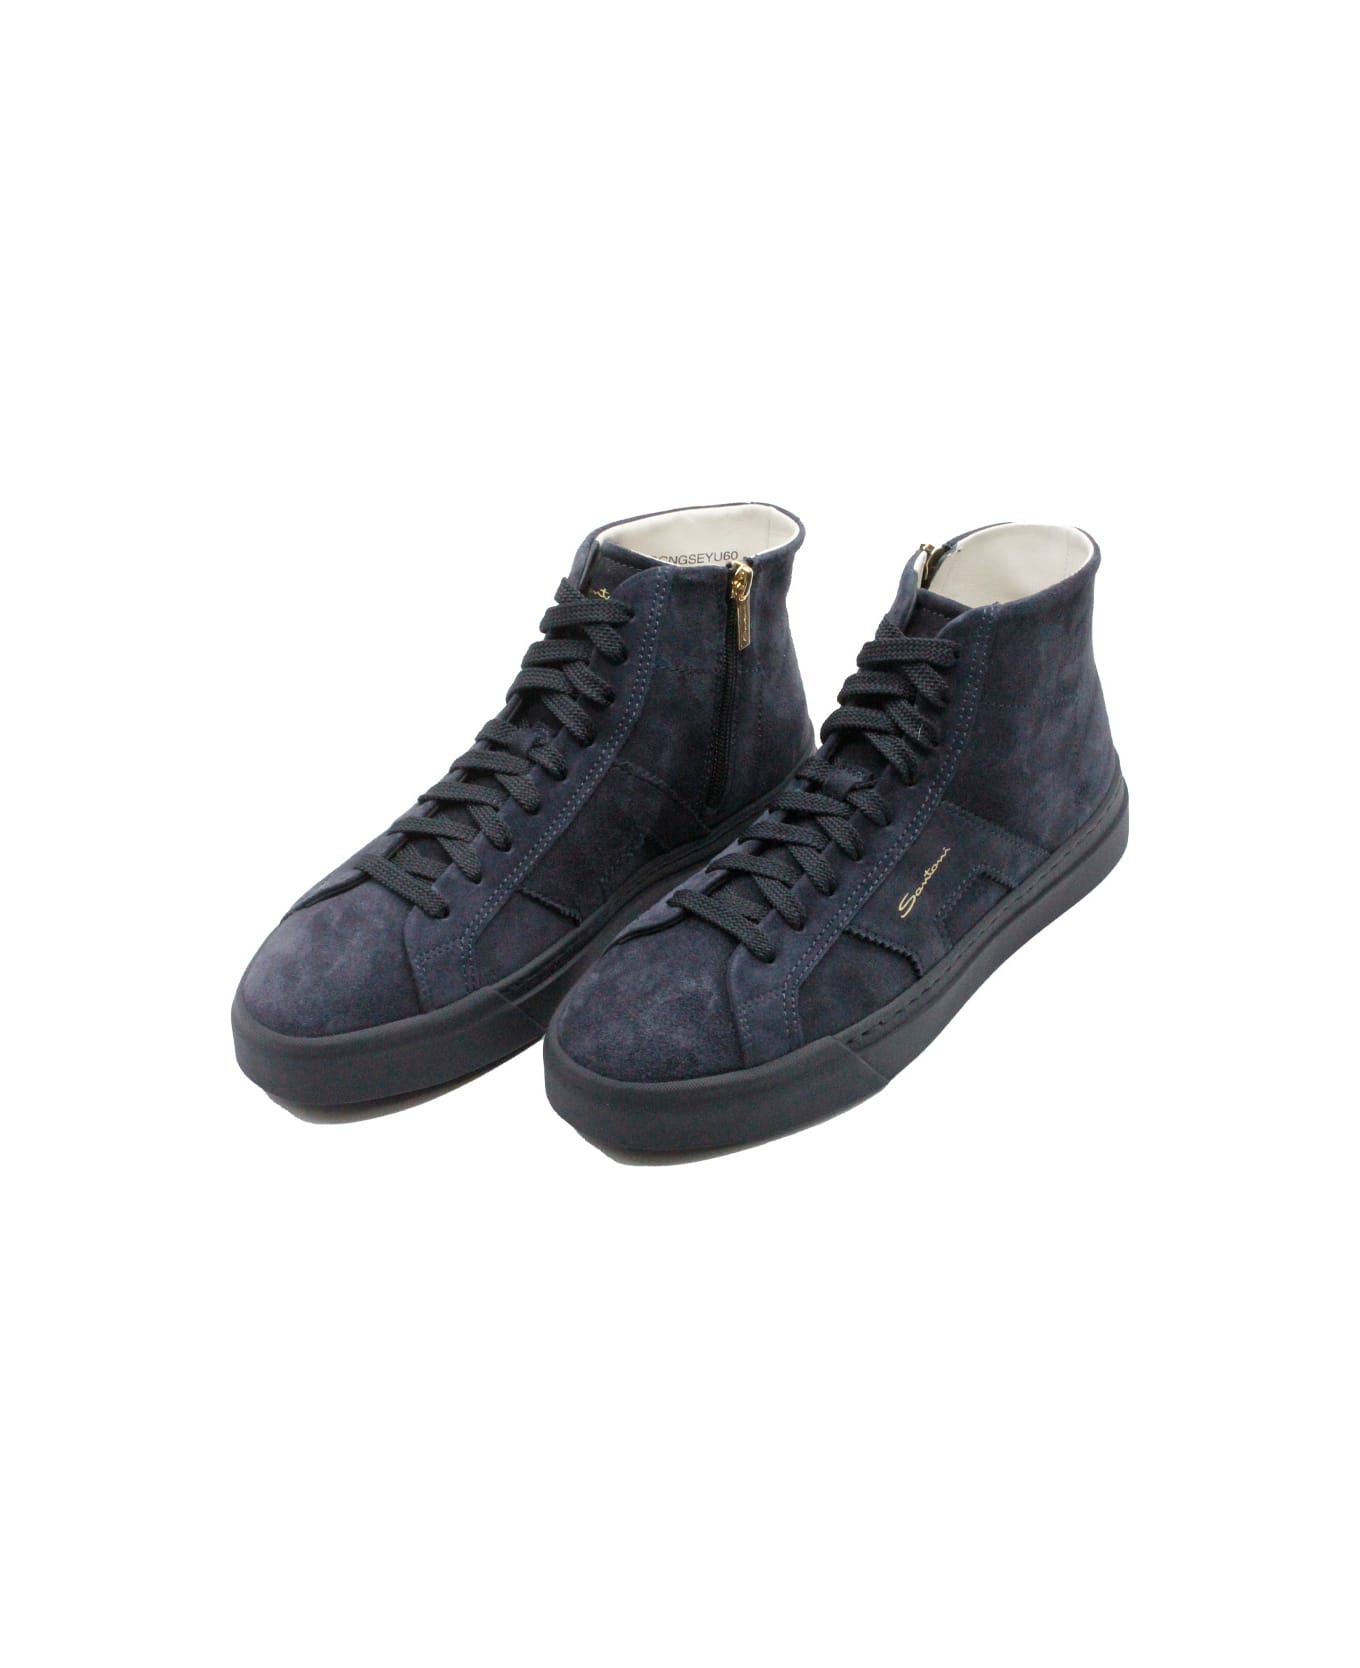 Santoni High-top Sneaker In Soft Suede Calfskin With Side Zip And Laces With Side Logo Lettering - Blu スニーカー